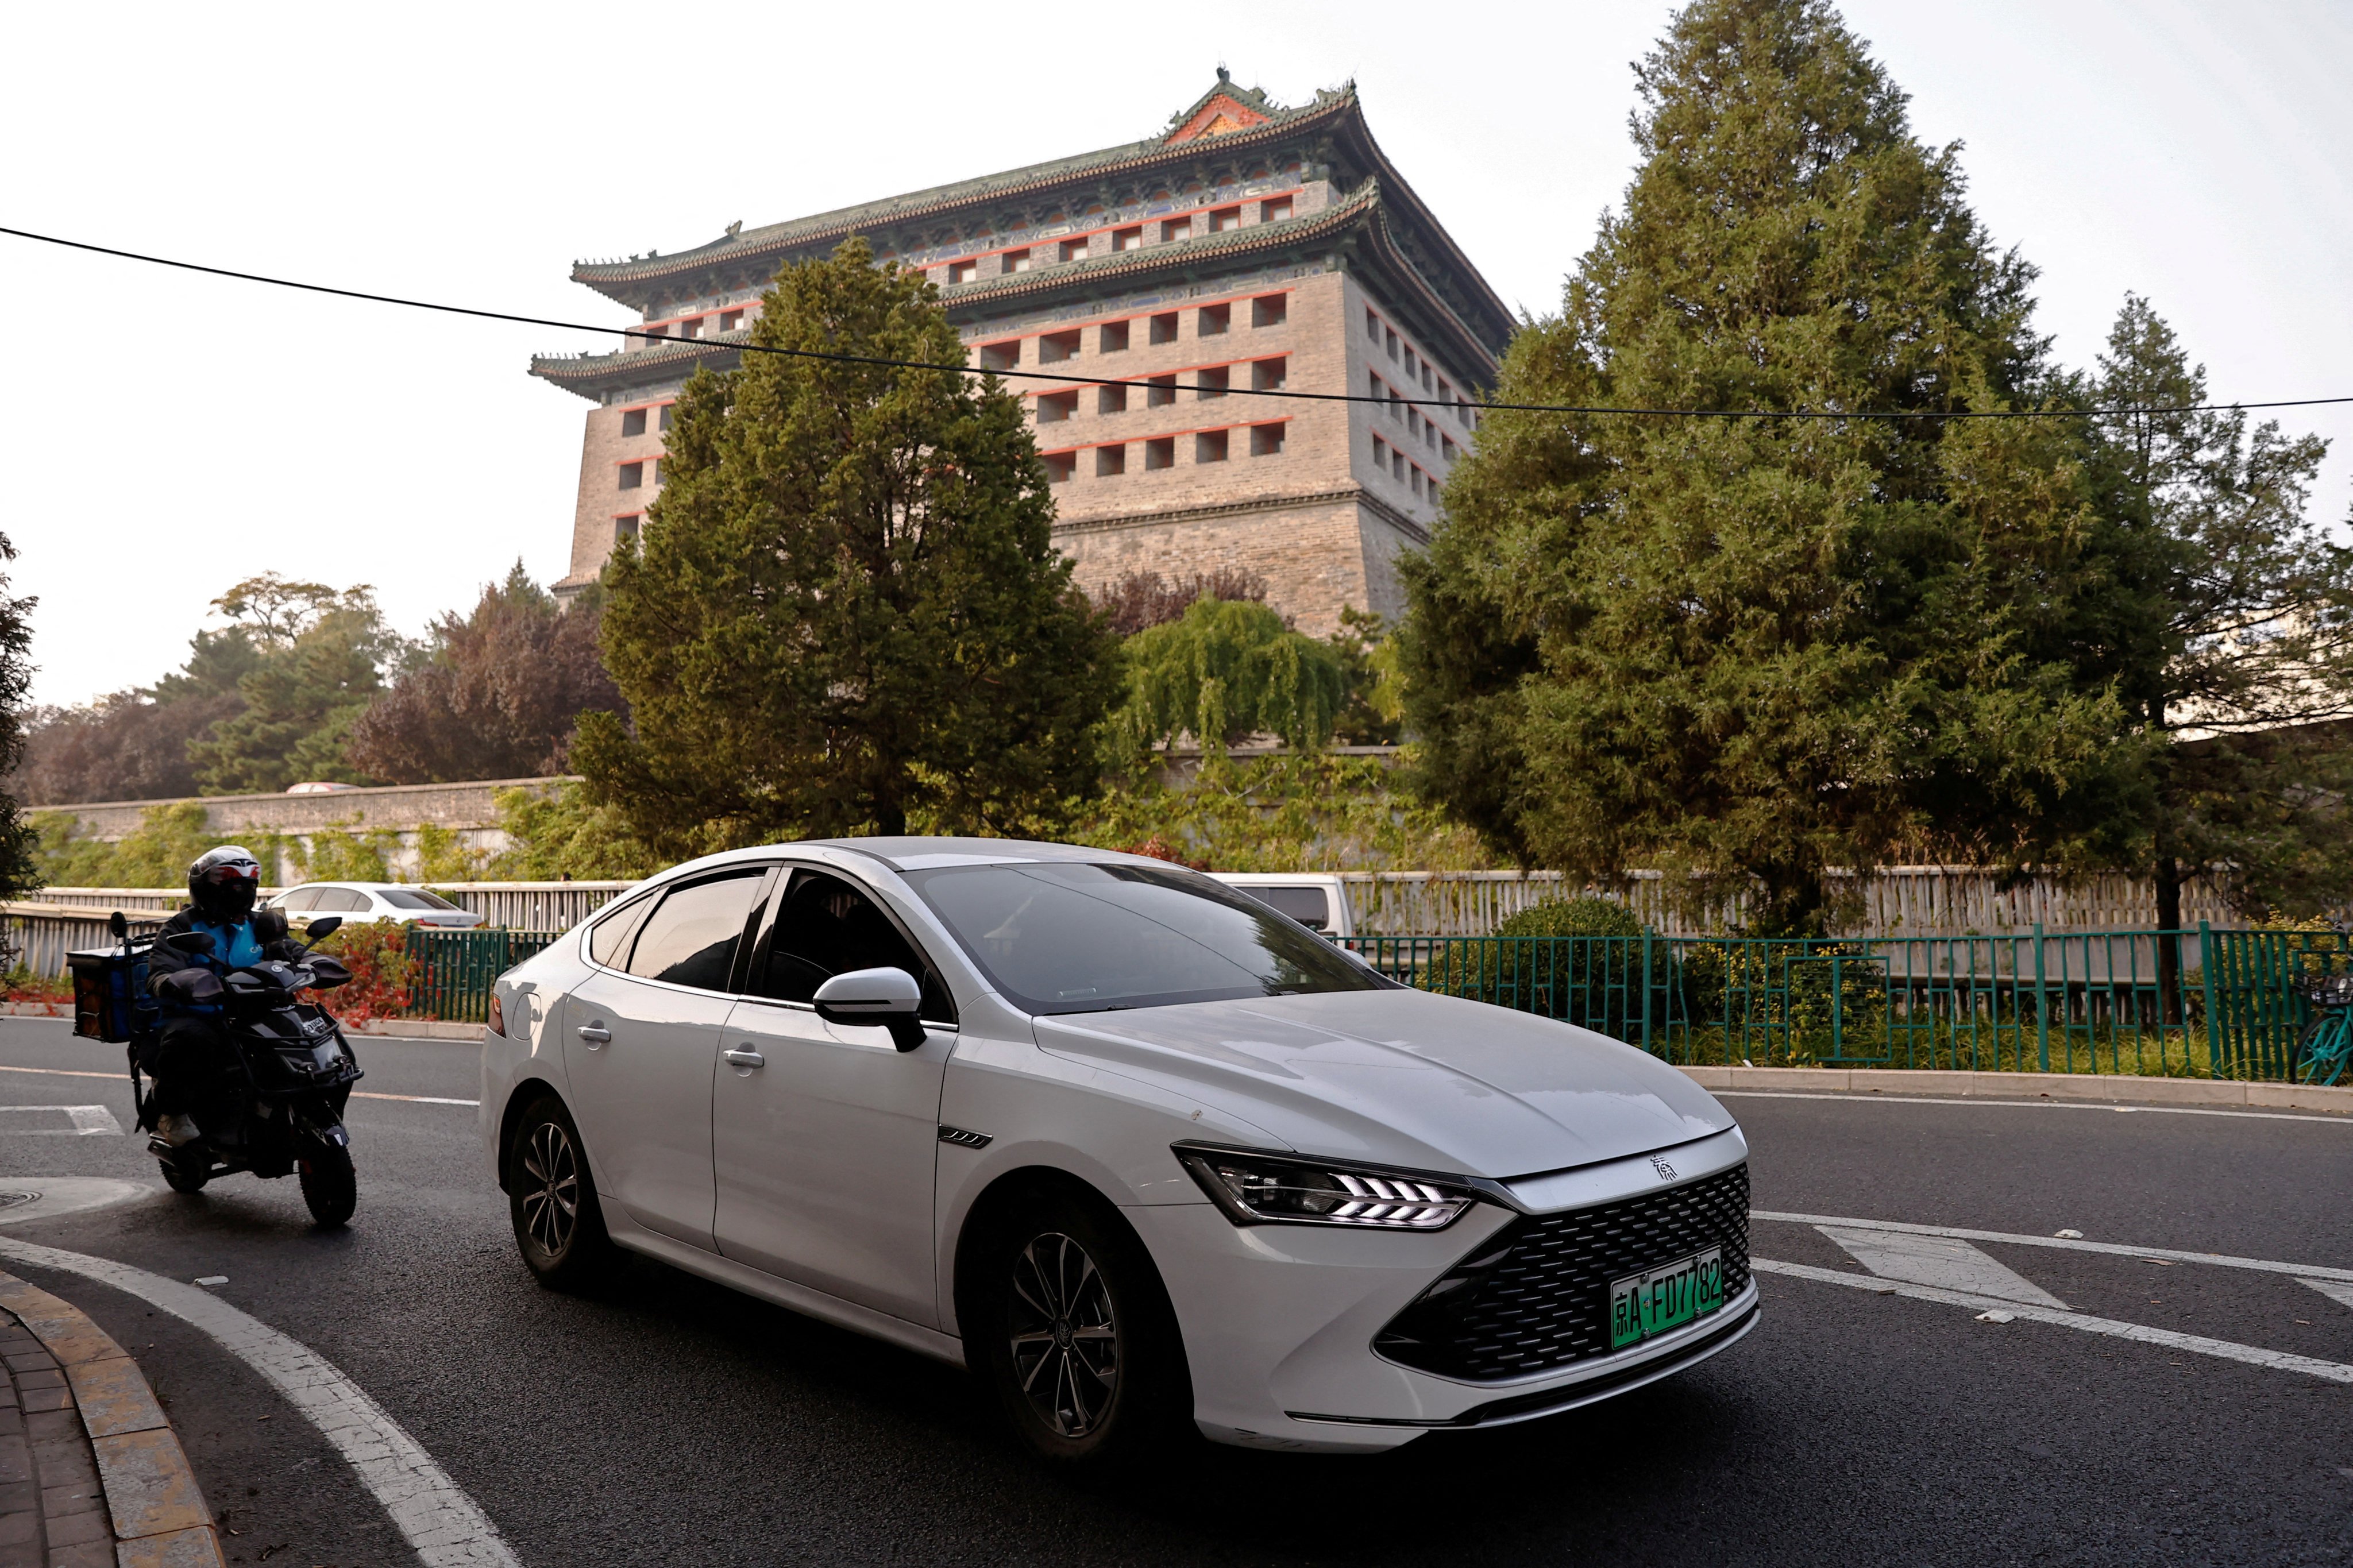 BYD’s electric vehicle Qin on a street in Beijing, China. Photo: Reuters